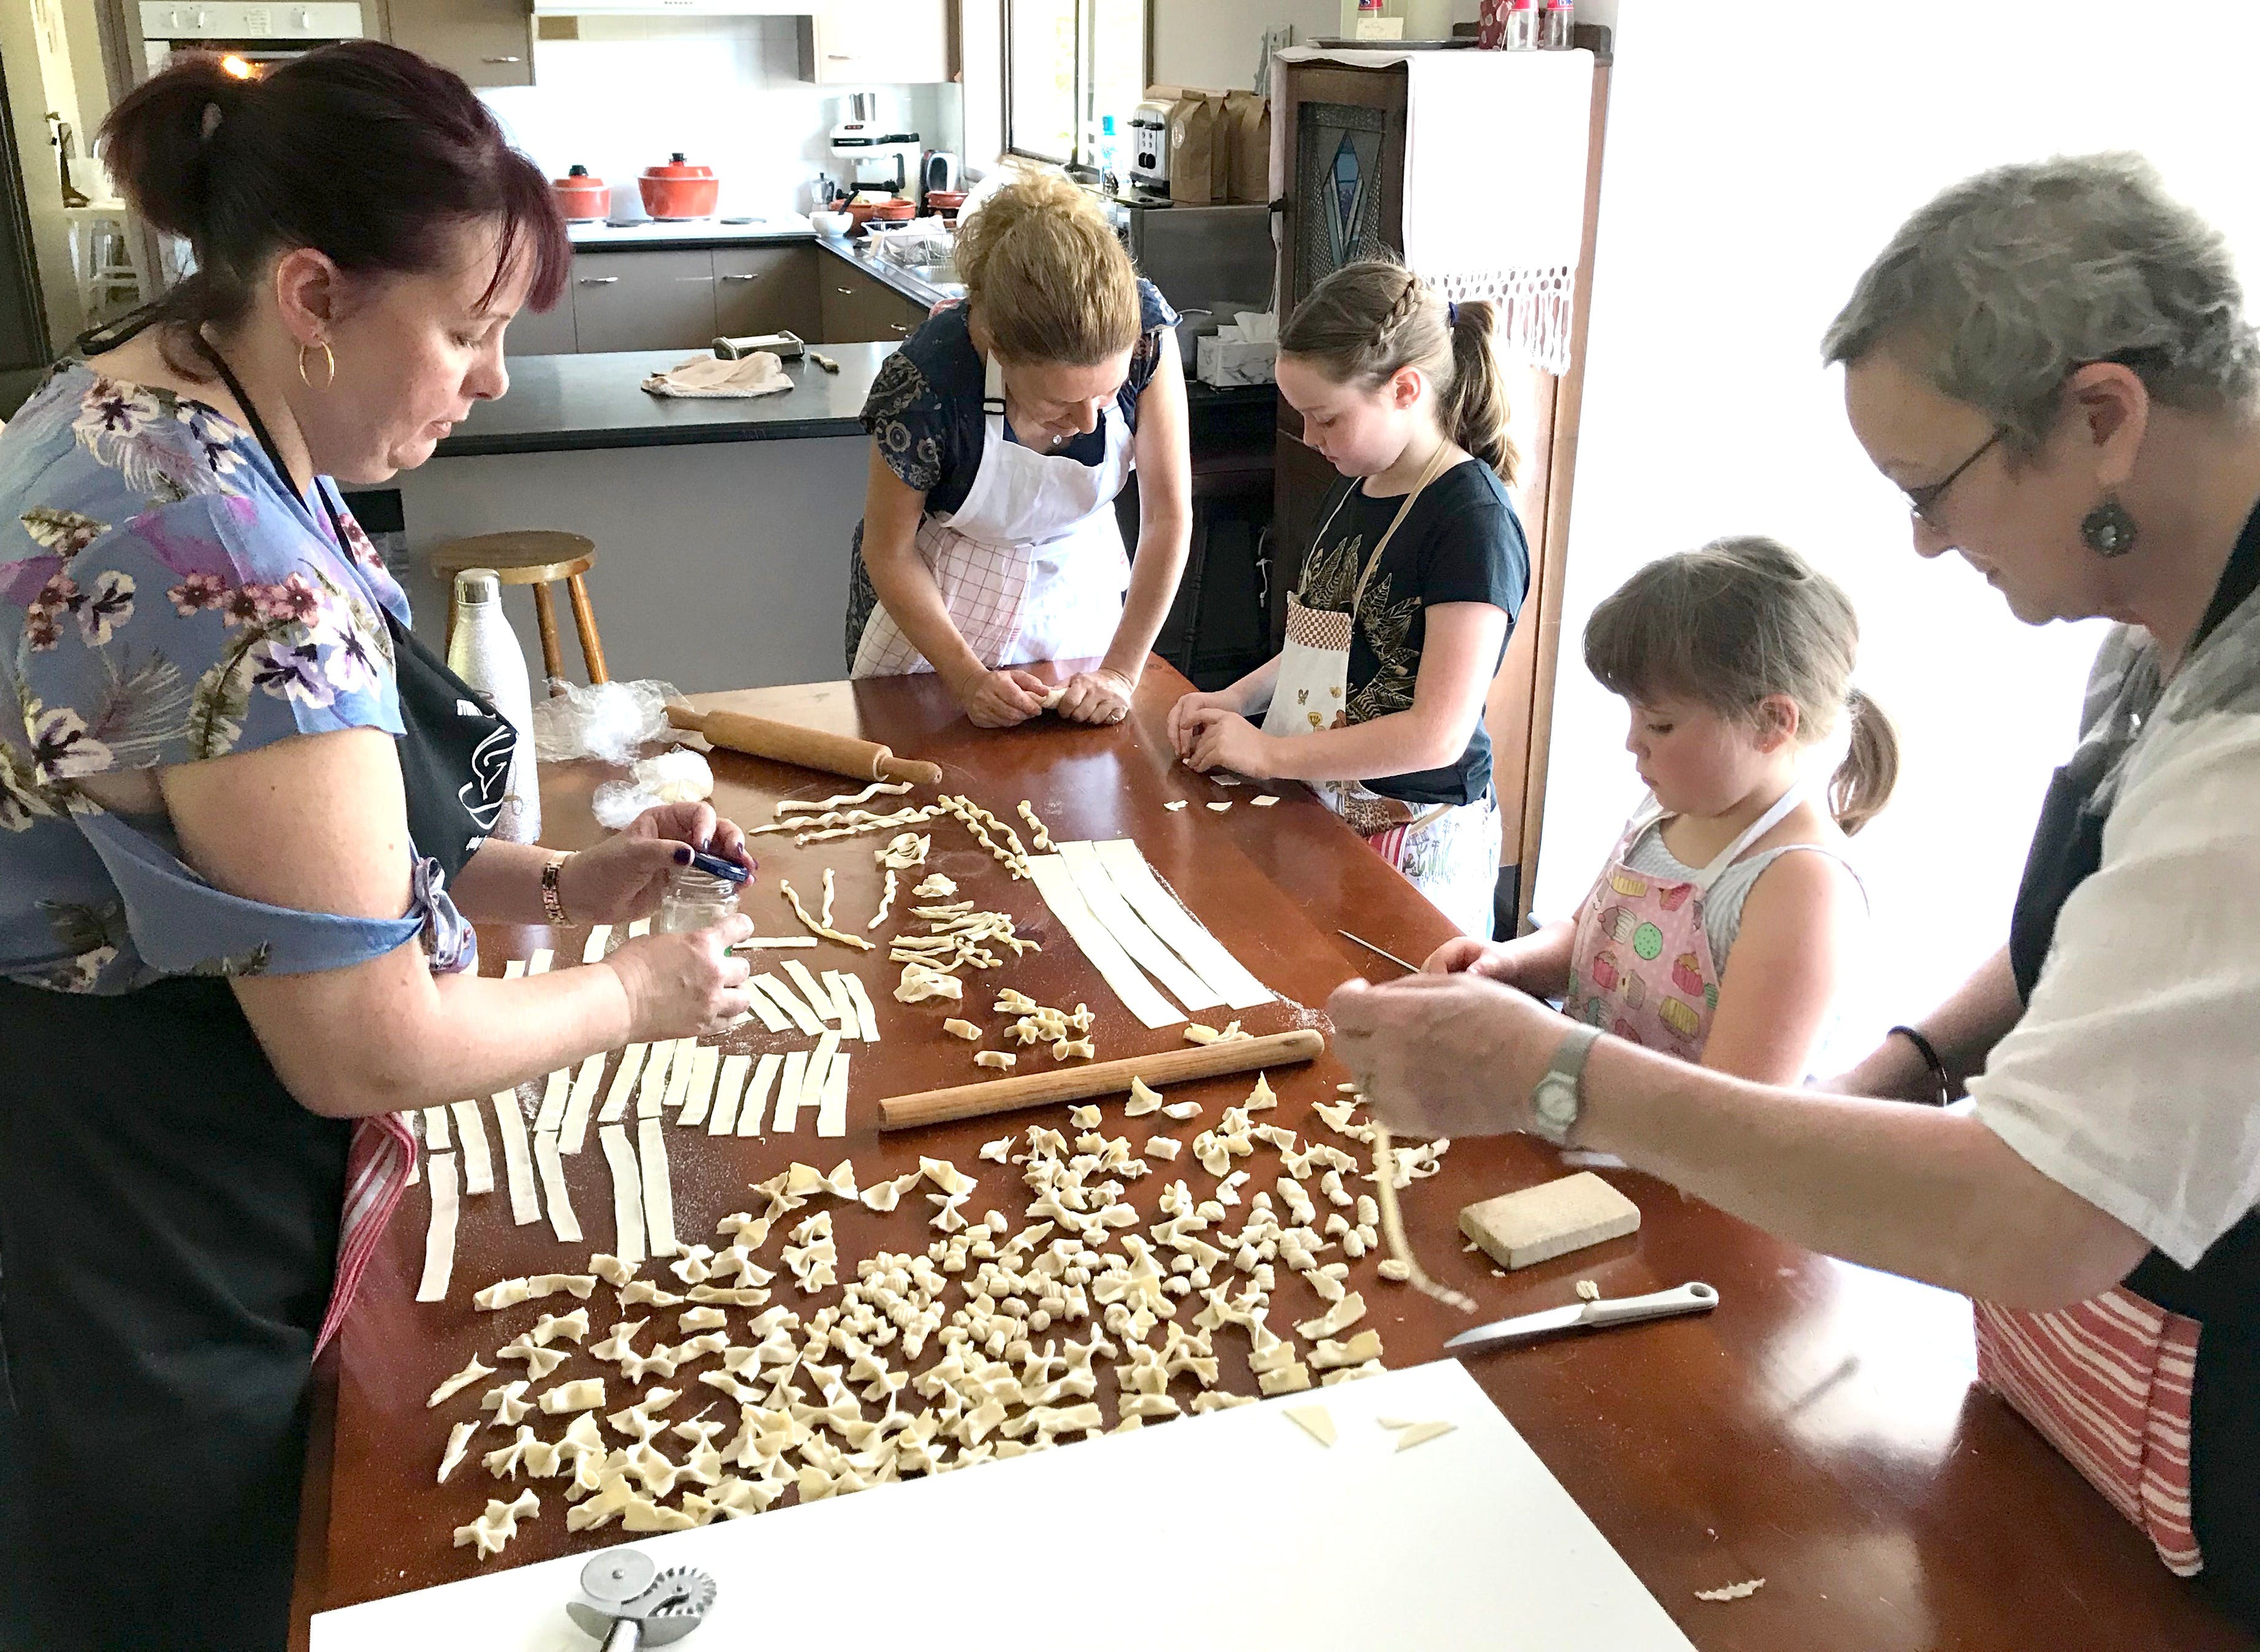 Kids Pasta Making Class - hands on fun at your house - Restaurants Sydney